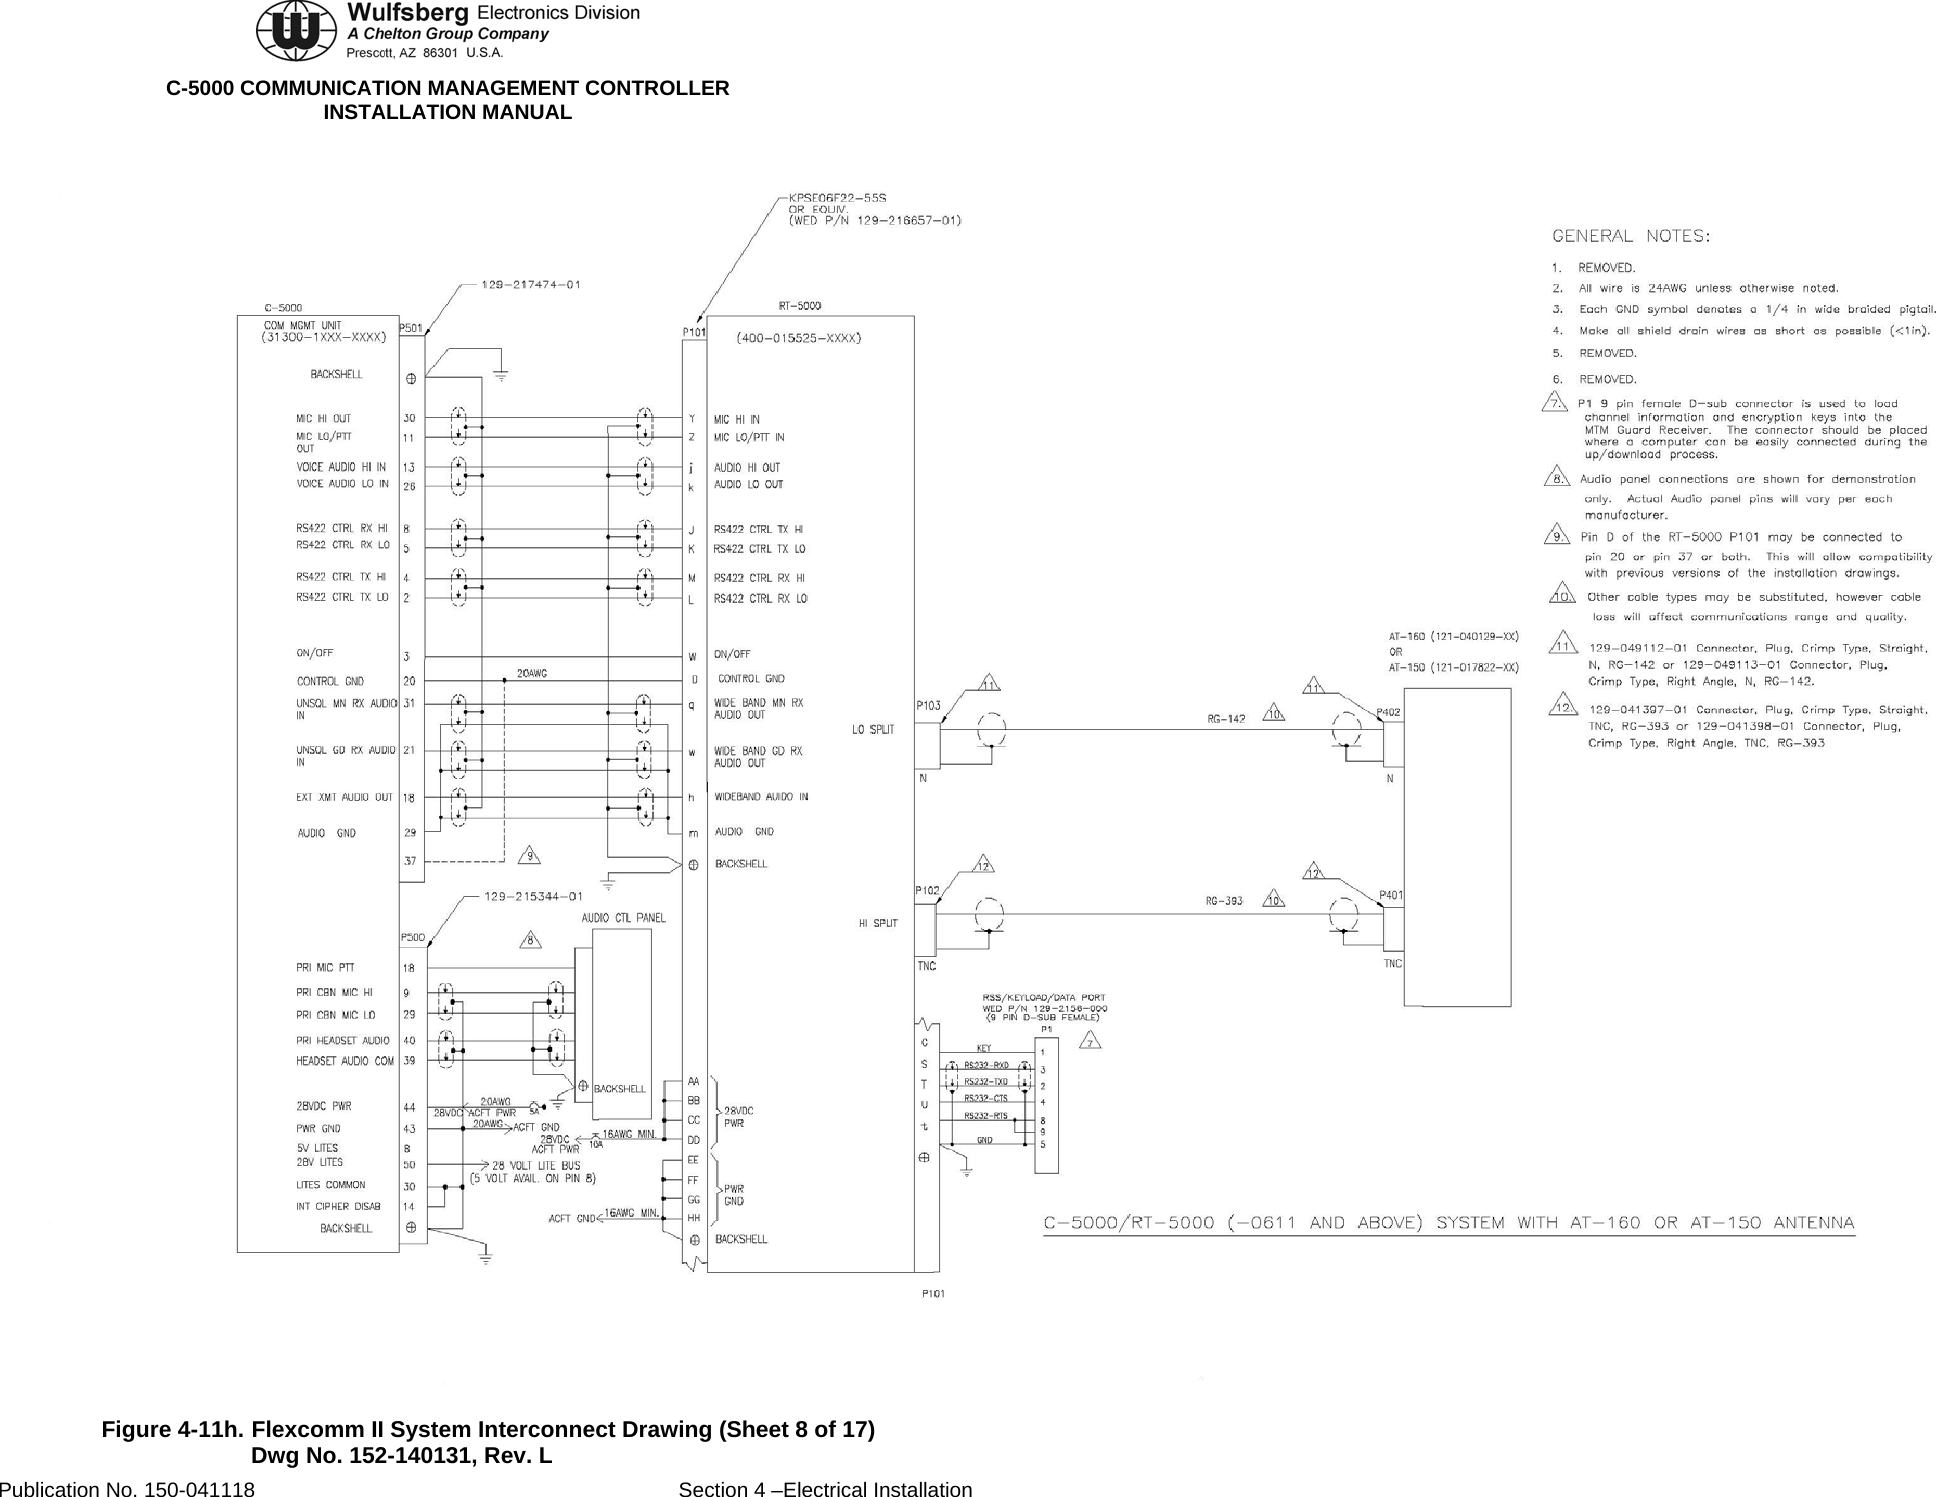  C-5000 COMMUNICATION MANAGEMENT CONTROLLER INSTALLATION MANUAL  Figure 4-11h. Flexcomm II System Interconnect Drawing (Sheet 8 of 17) Dwg No. 152-140131, Rev. L Publication No. 150-041118  Section 4 –Electrical Installation 